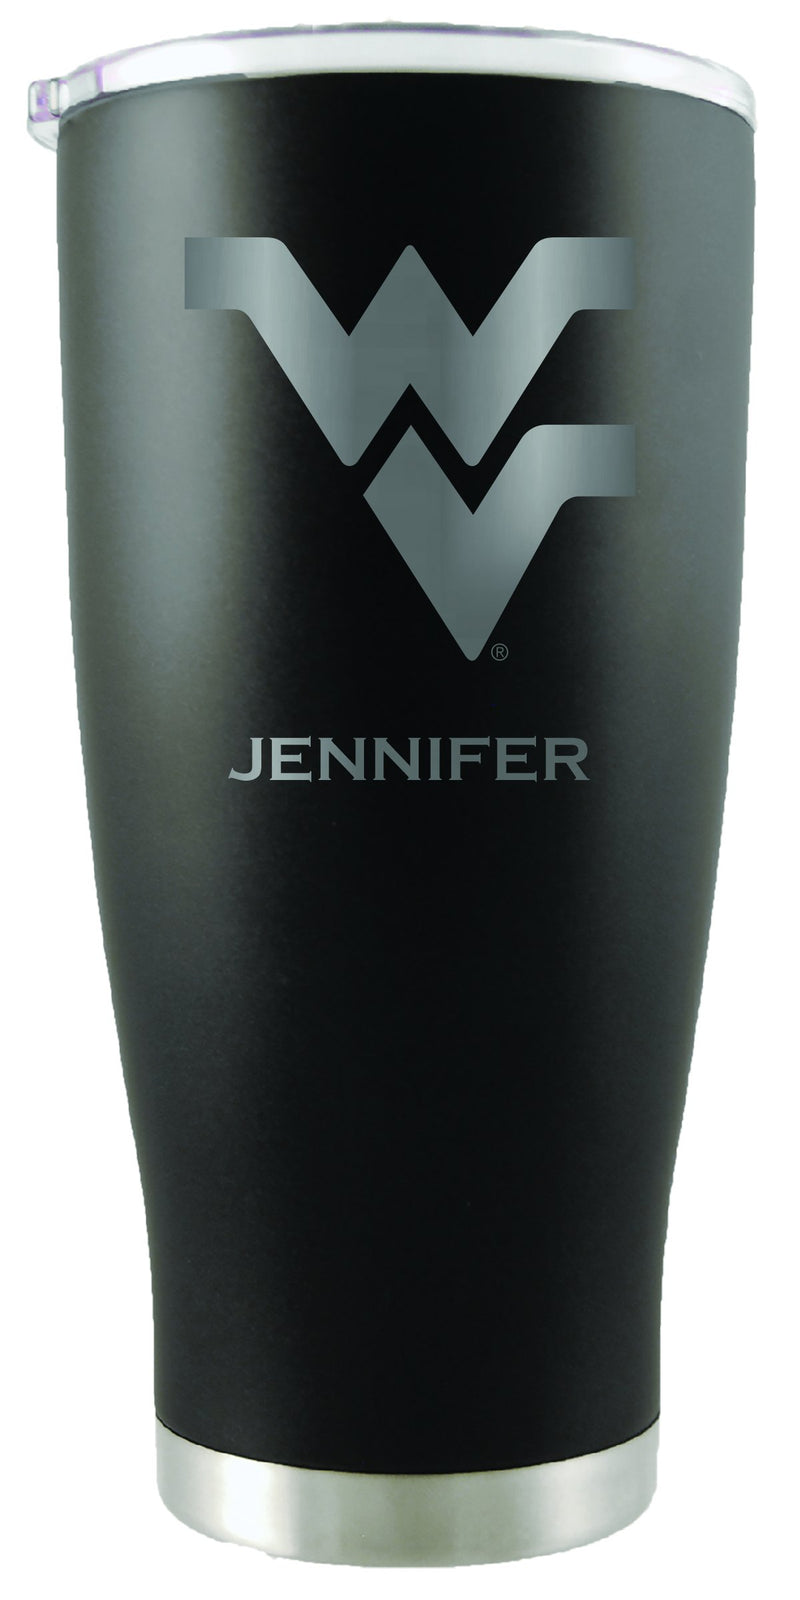 20oz Black Personalized Stainless Steel Tumbler | West Virginia
COL, CurrentProduct, Drinkware_category_All, Personalized_Personalized, West Virginia Mountaineers, WVI
The Memory Company